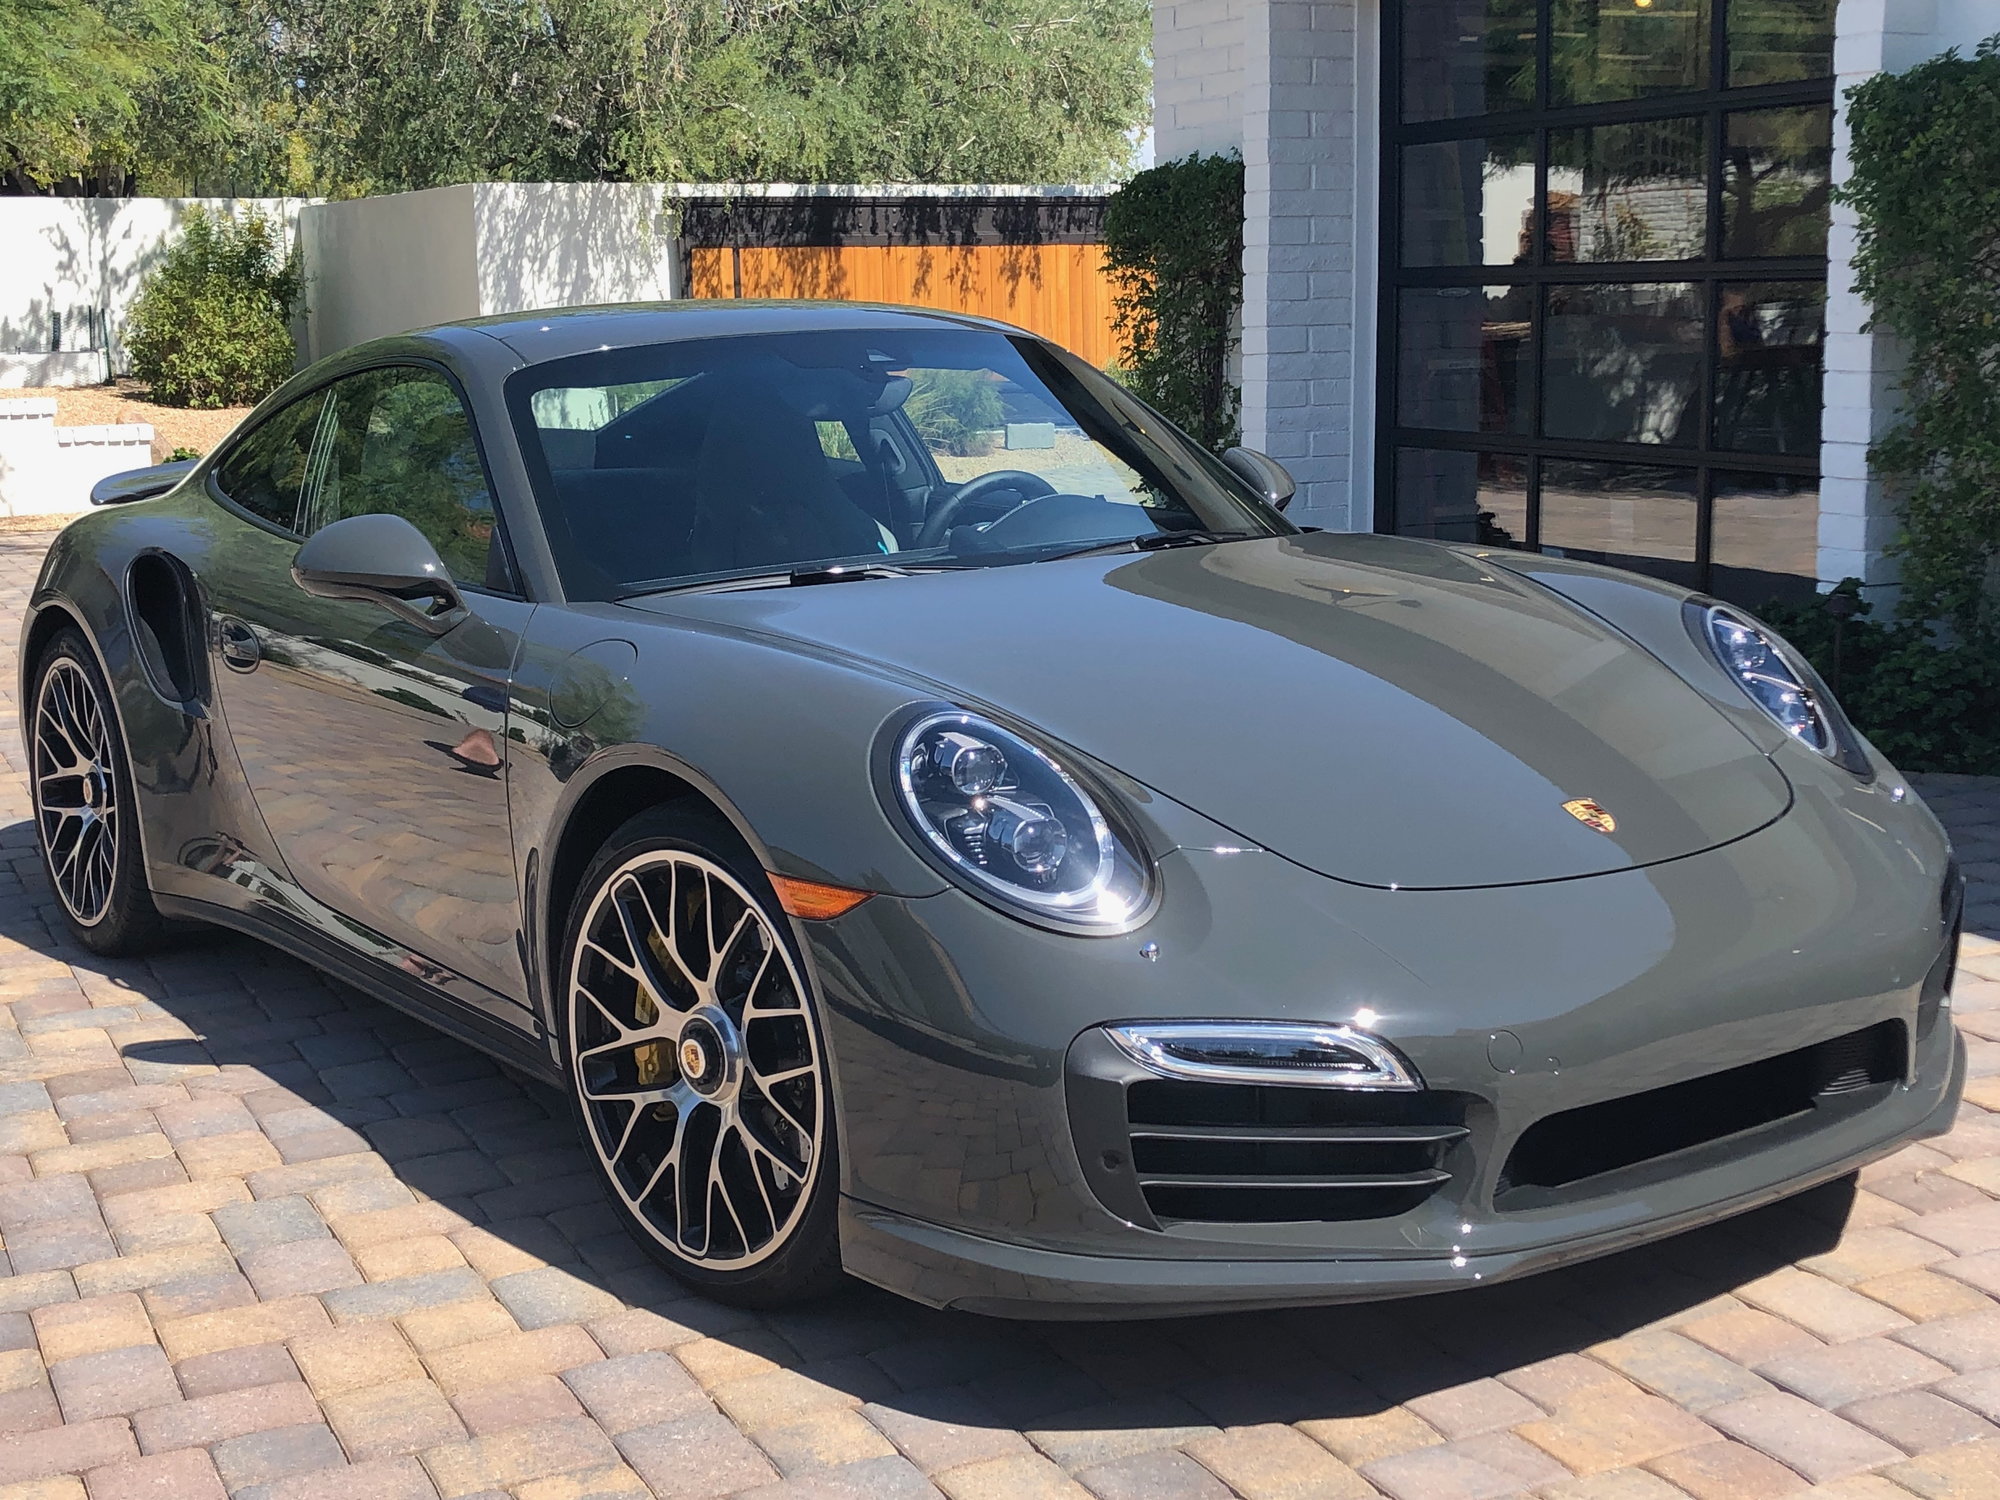 2016 Porsche 911 - 2016 991 Turbo S - PTS Slate Grey - Used - VIN WP0AD2A91GS166298 - 6,100 Miles - 6 cyl - AWD - Automatic - Coupe - Gray - Phoenix, AZ 85018, United States